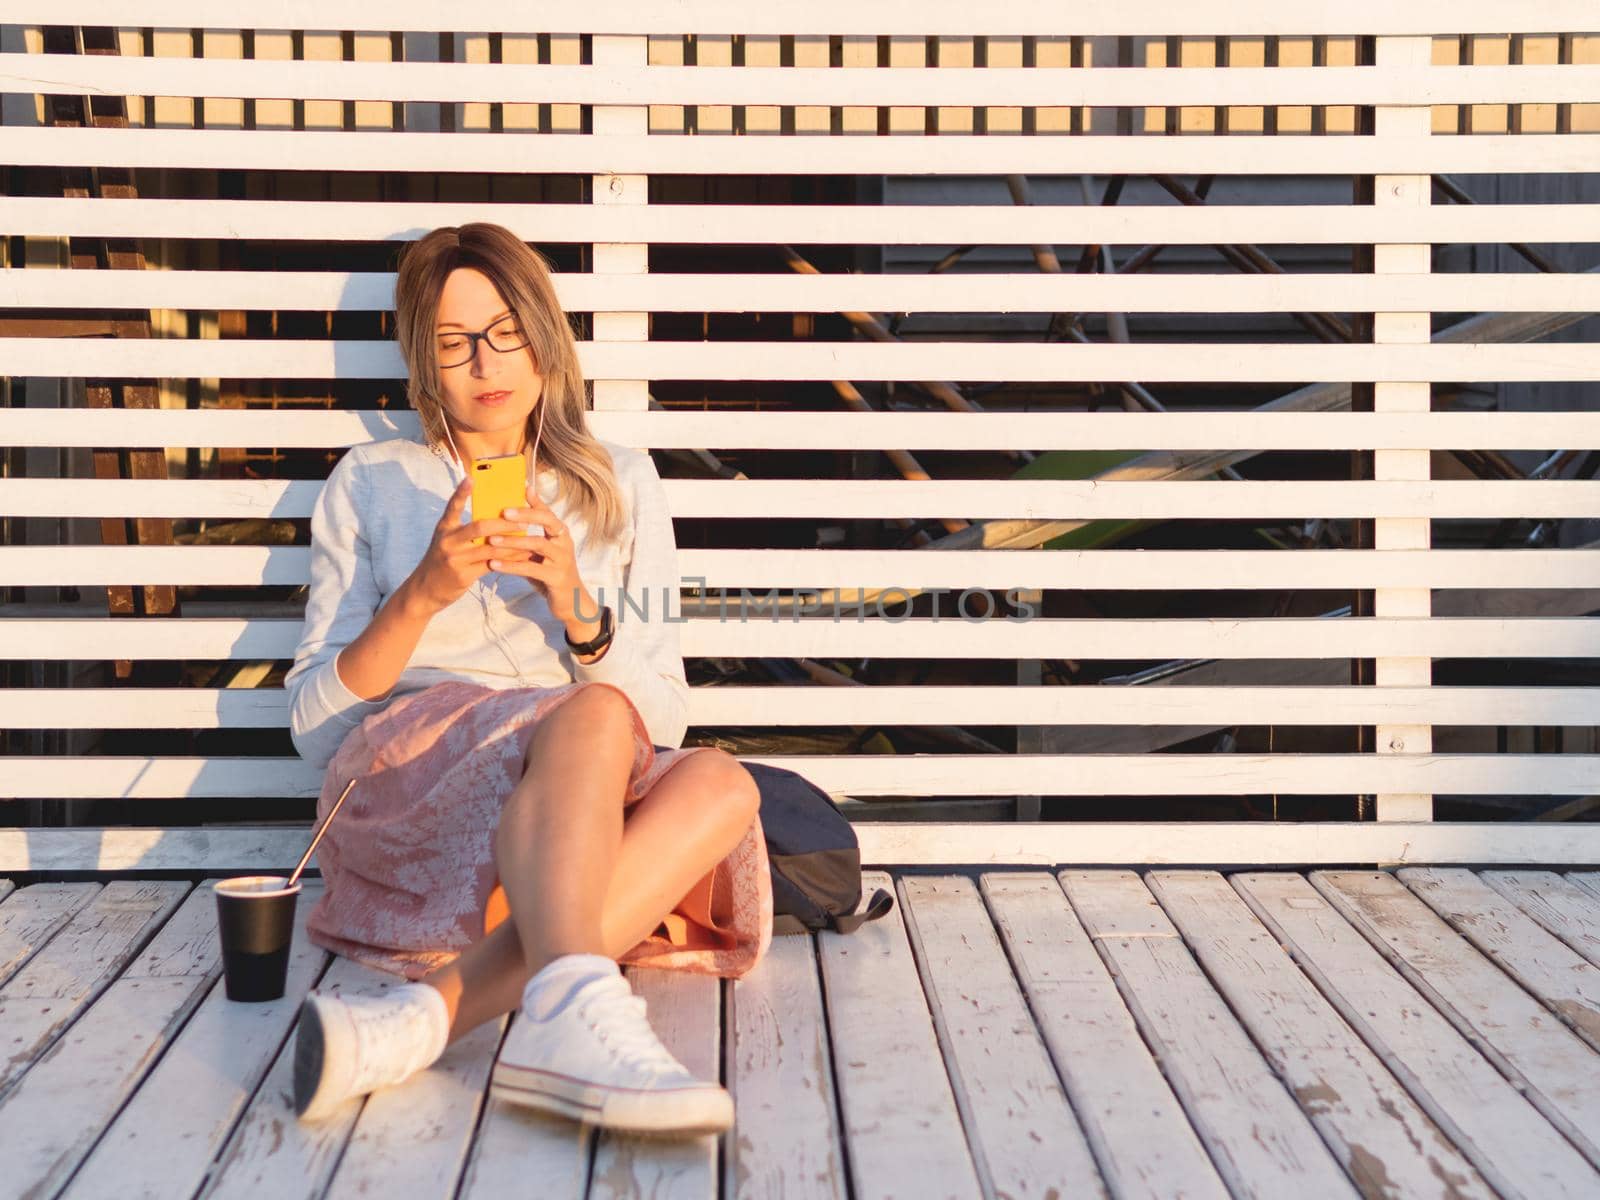 Woman with cup of coffee meets sunset on wooden pier. Female with curly hair and eyeglasses listens to music from smartphone. Enjoying nature outdoors. Summer casual clothes. Summer vibes.